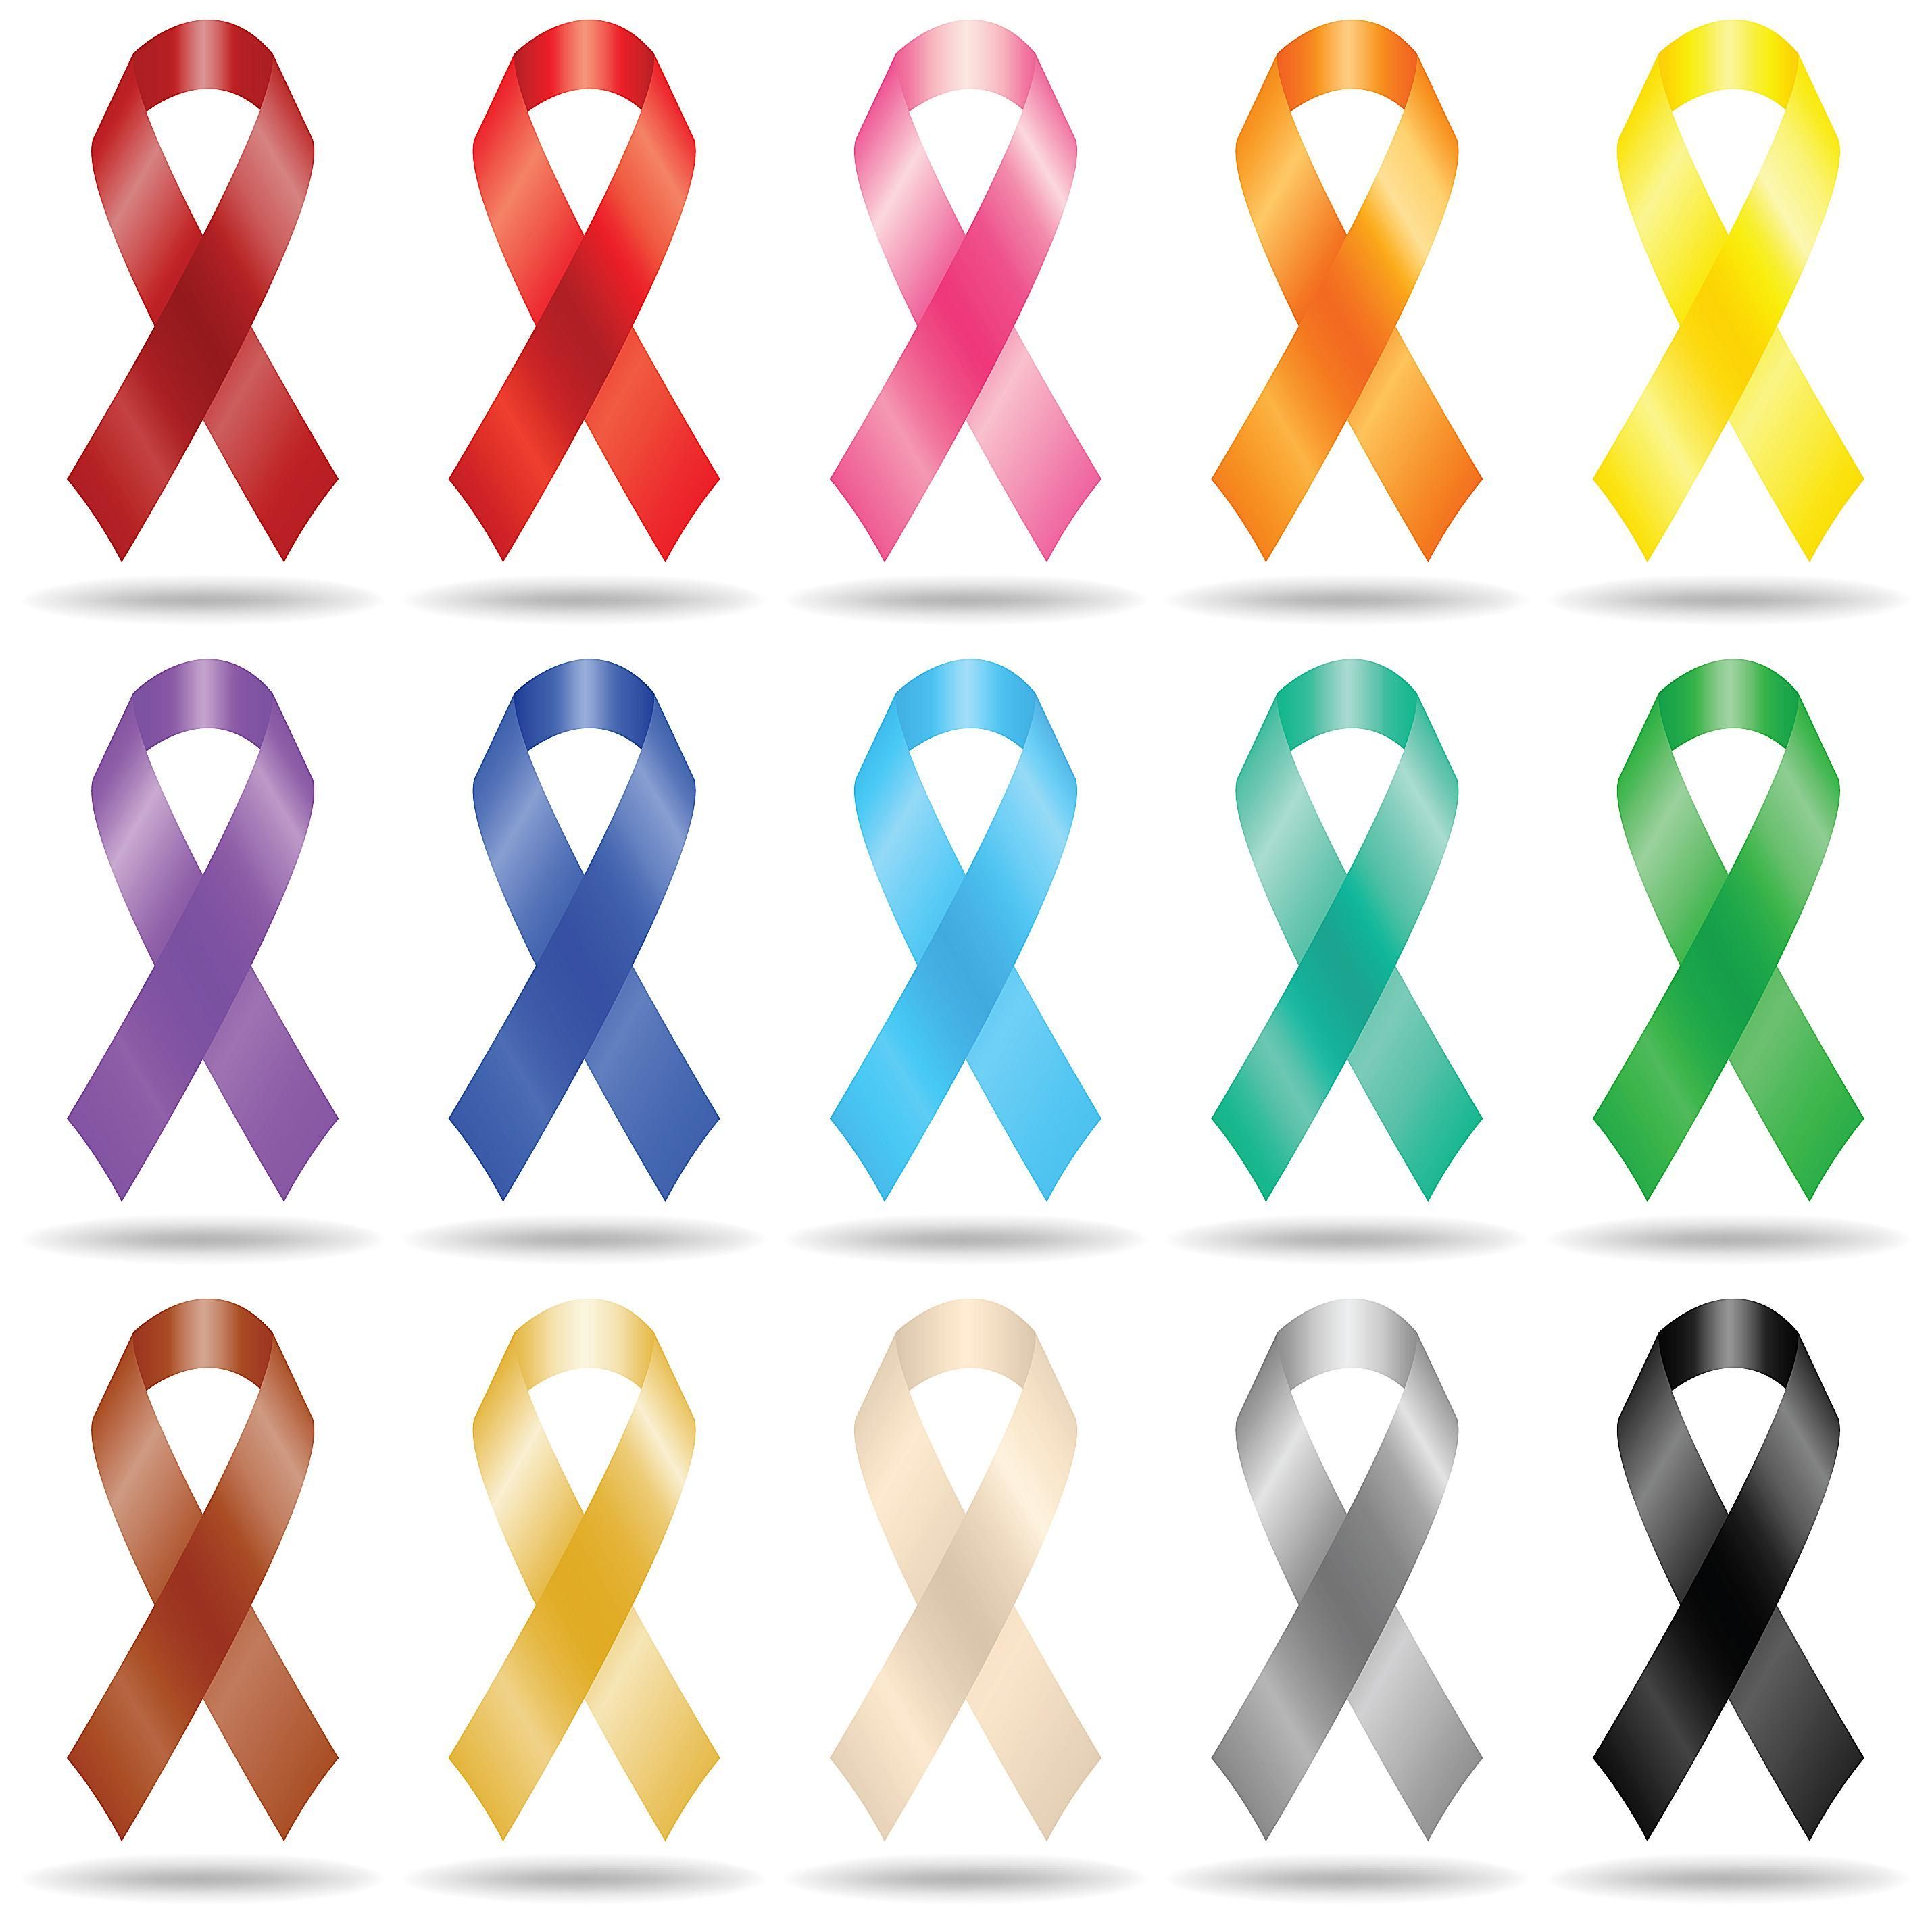 List of Colors for Cancer Ribbons